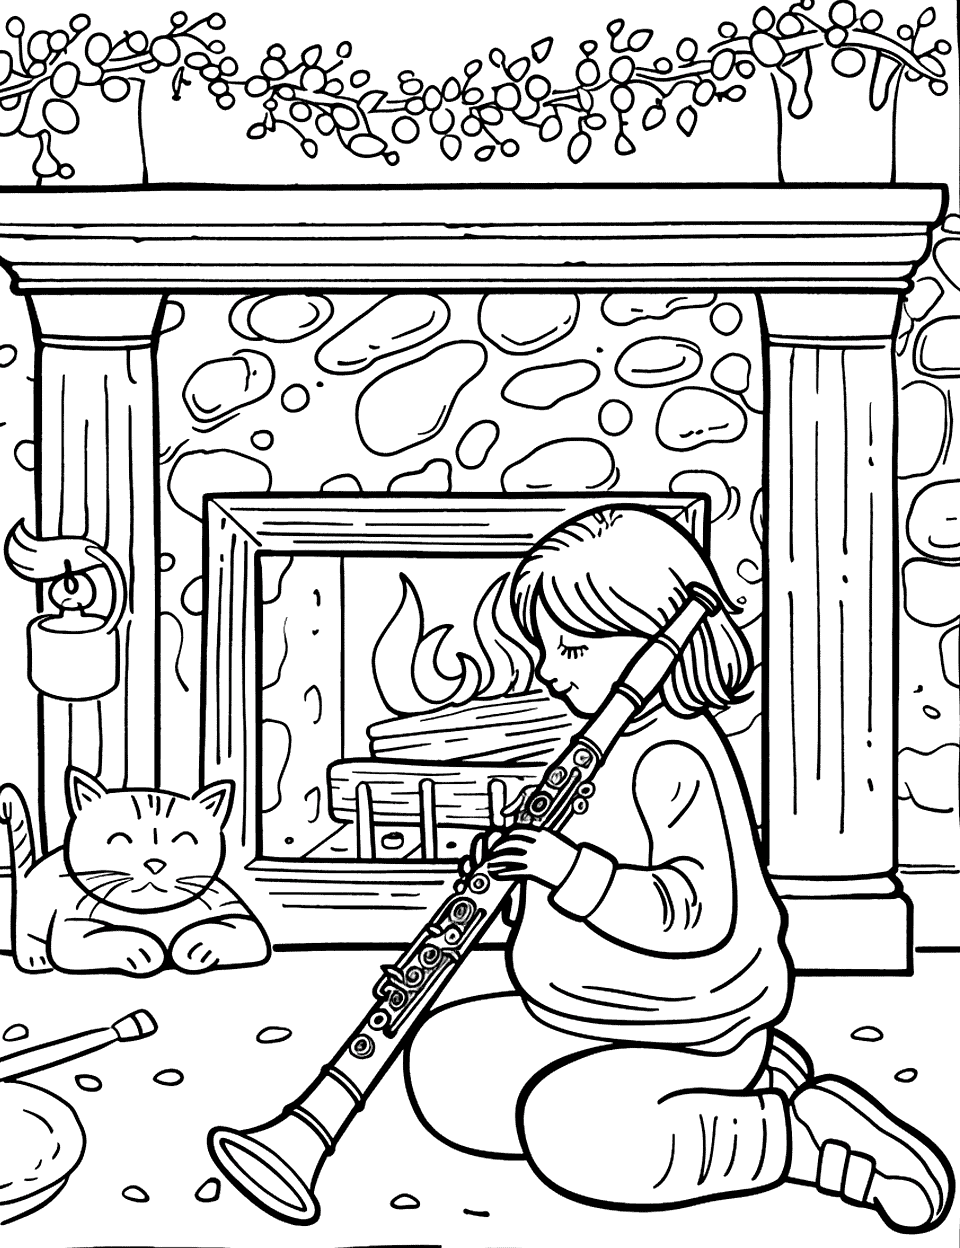 Clarinet by the Fireplace Music Coloring Page - A child practicing the clarinet by a cozy fireplace with a cat sleeping beside it.